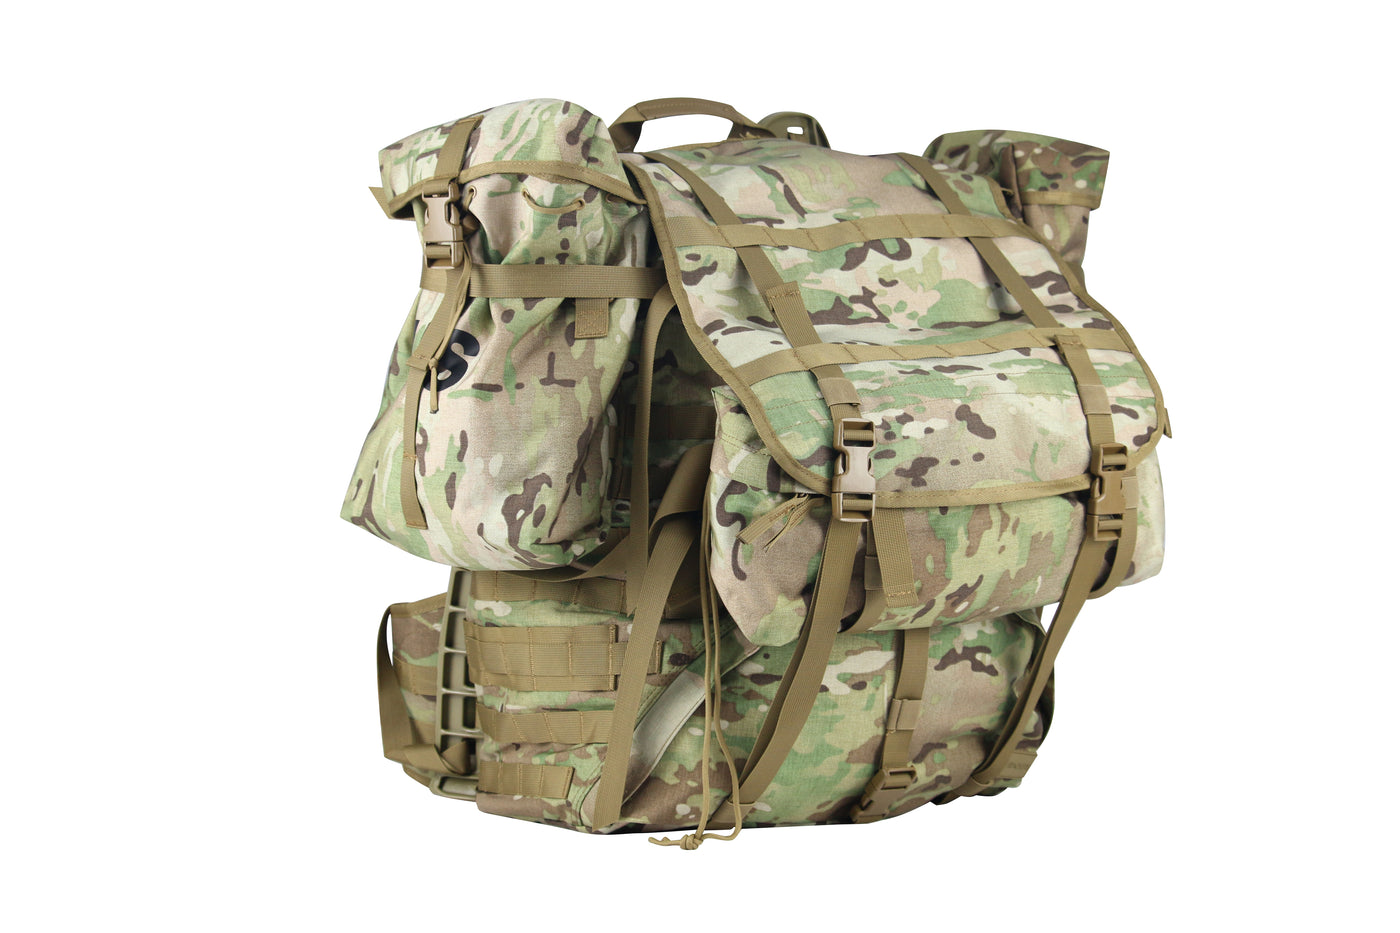 ATACLETE MOLLE II OCP Large Ruck Sack with Frame